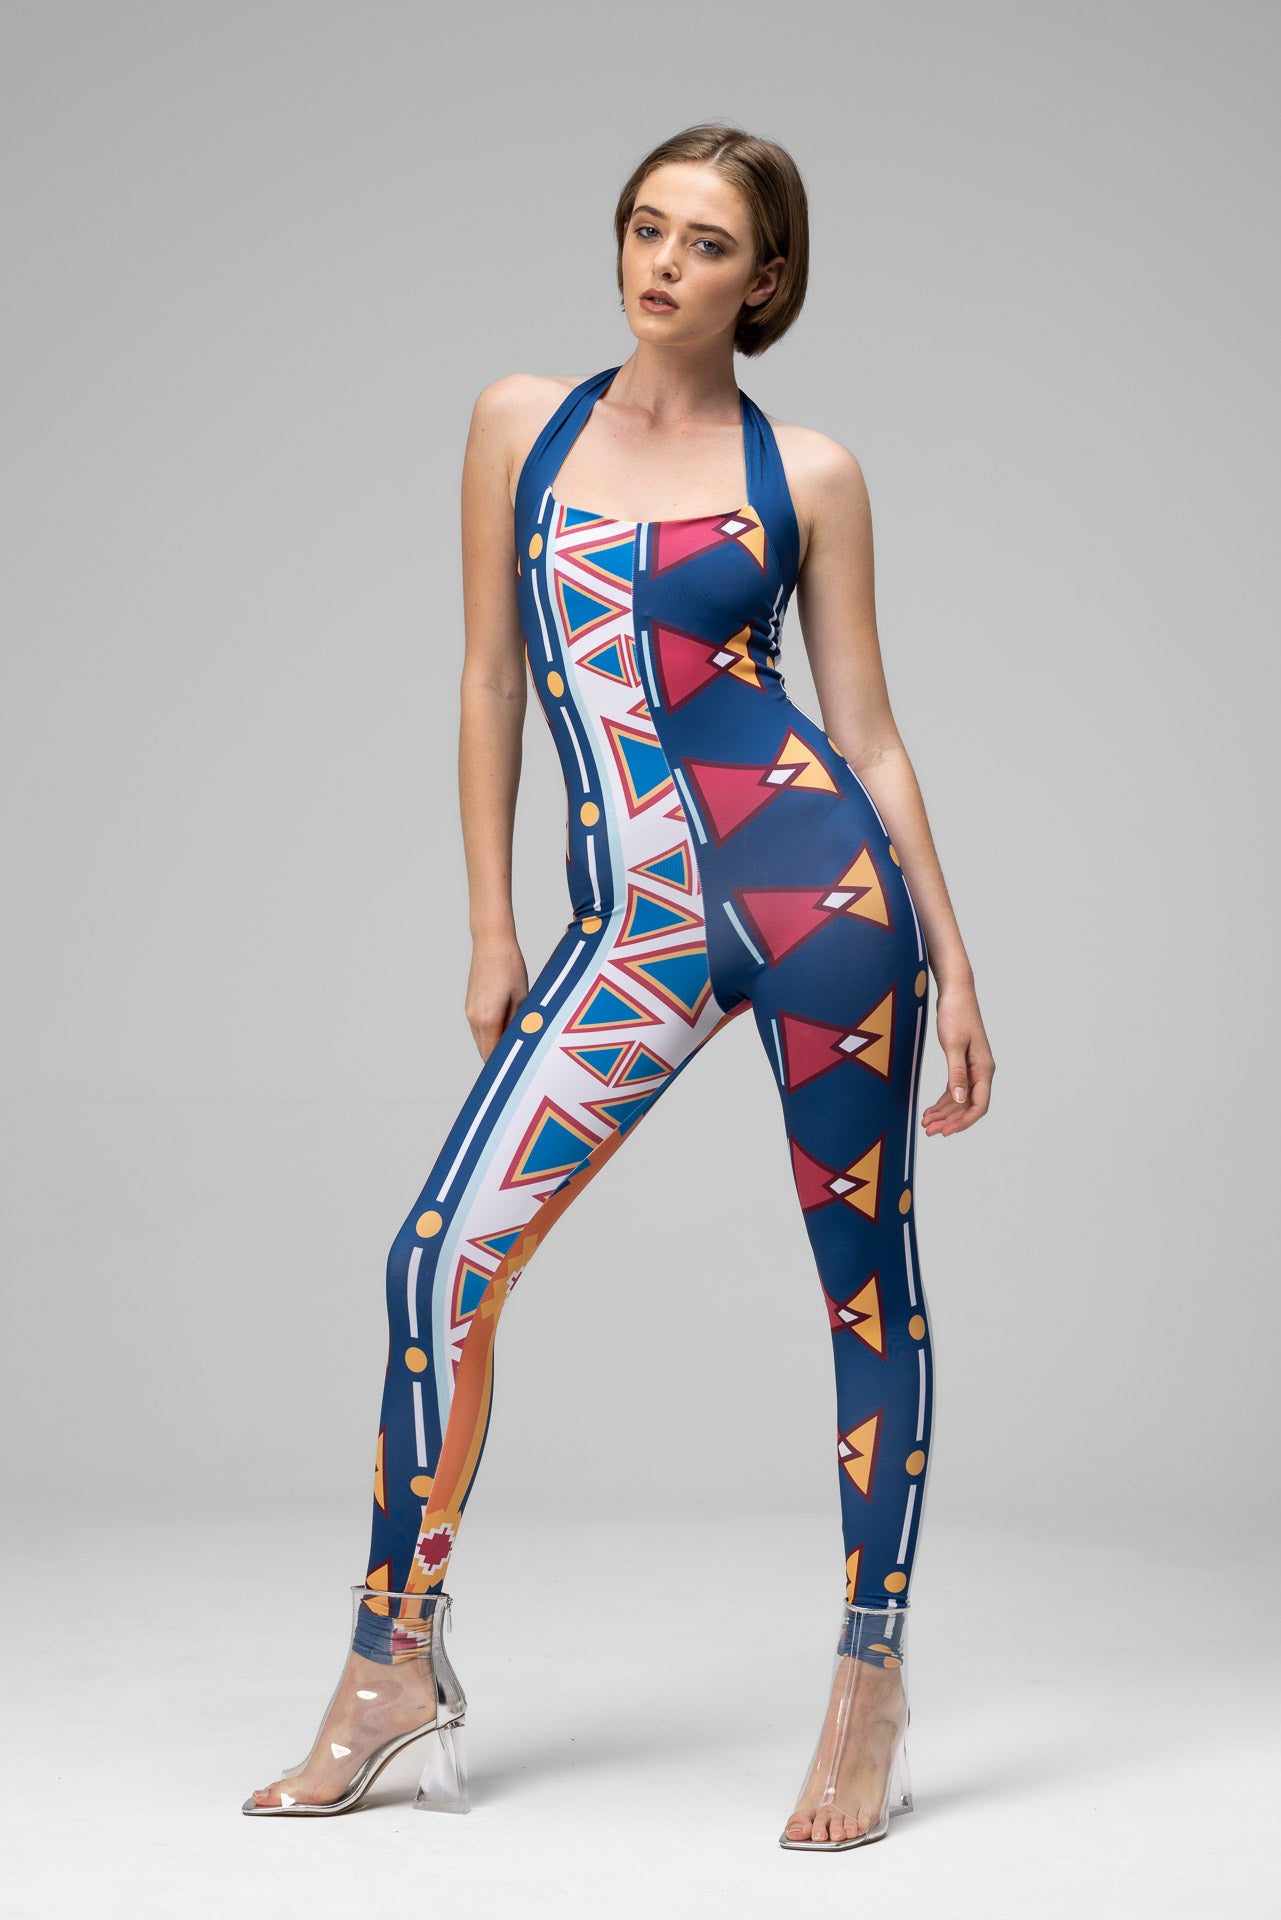 Catsuit: Halter Neck colourful